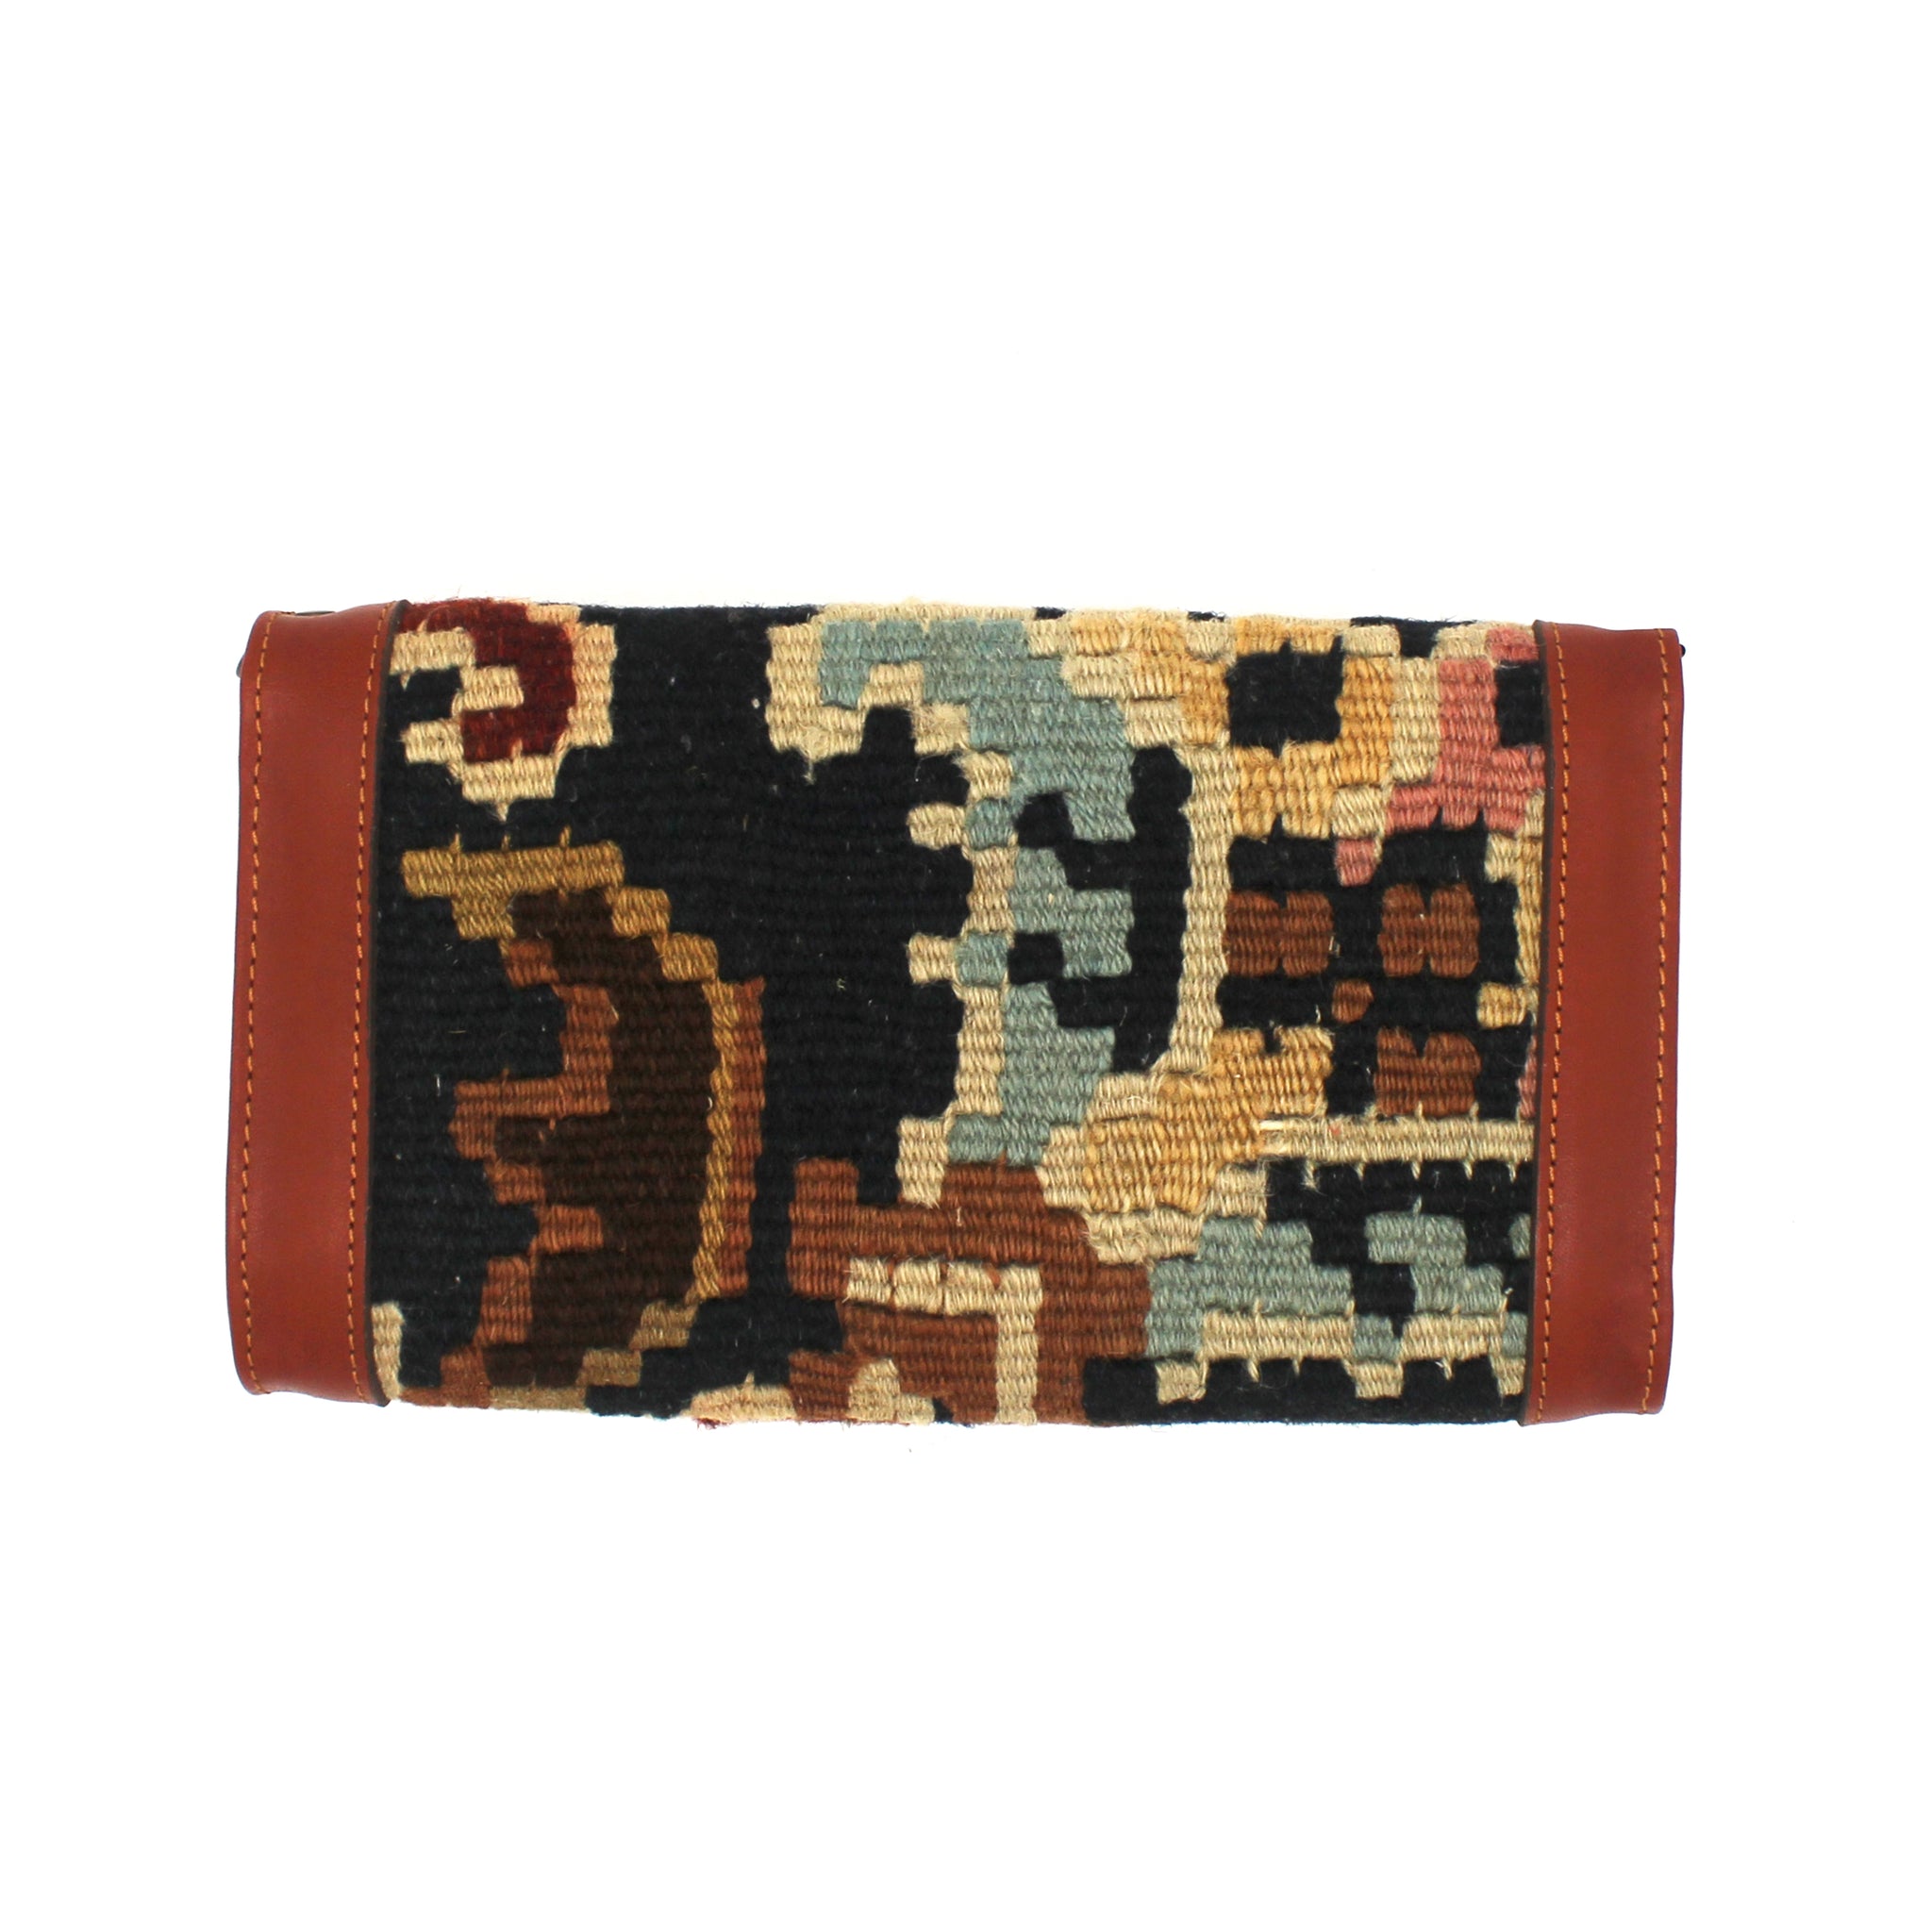 Vintage Rug and Leather Wallet with Strap No. 3